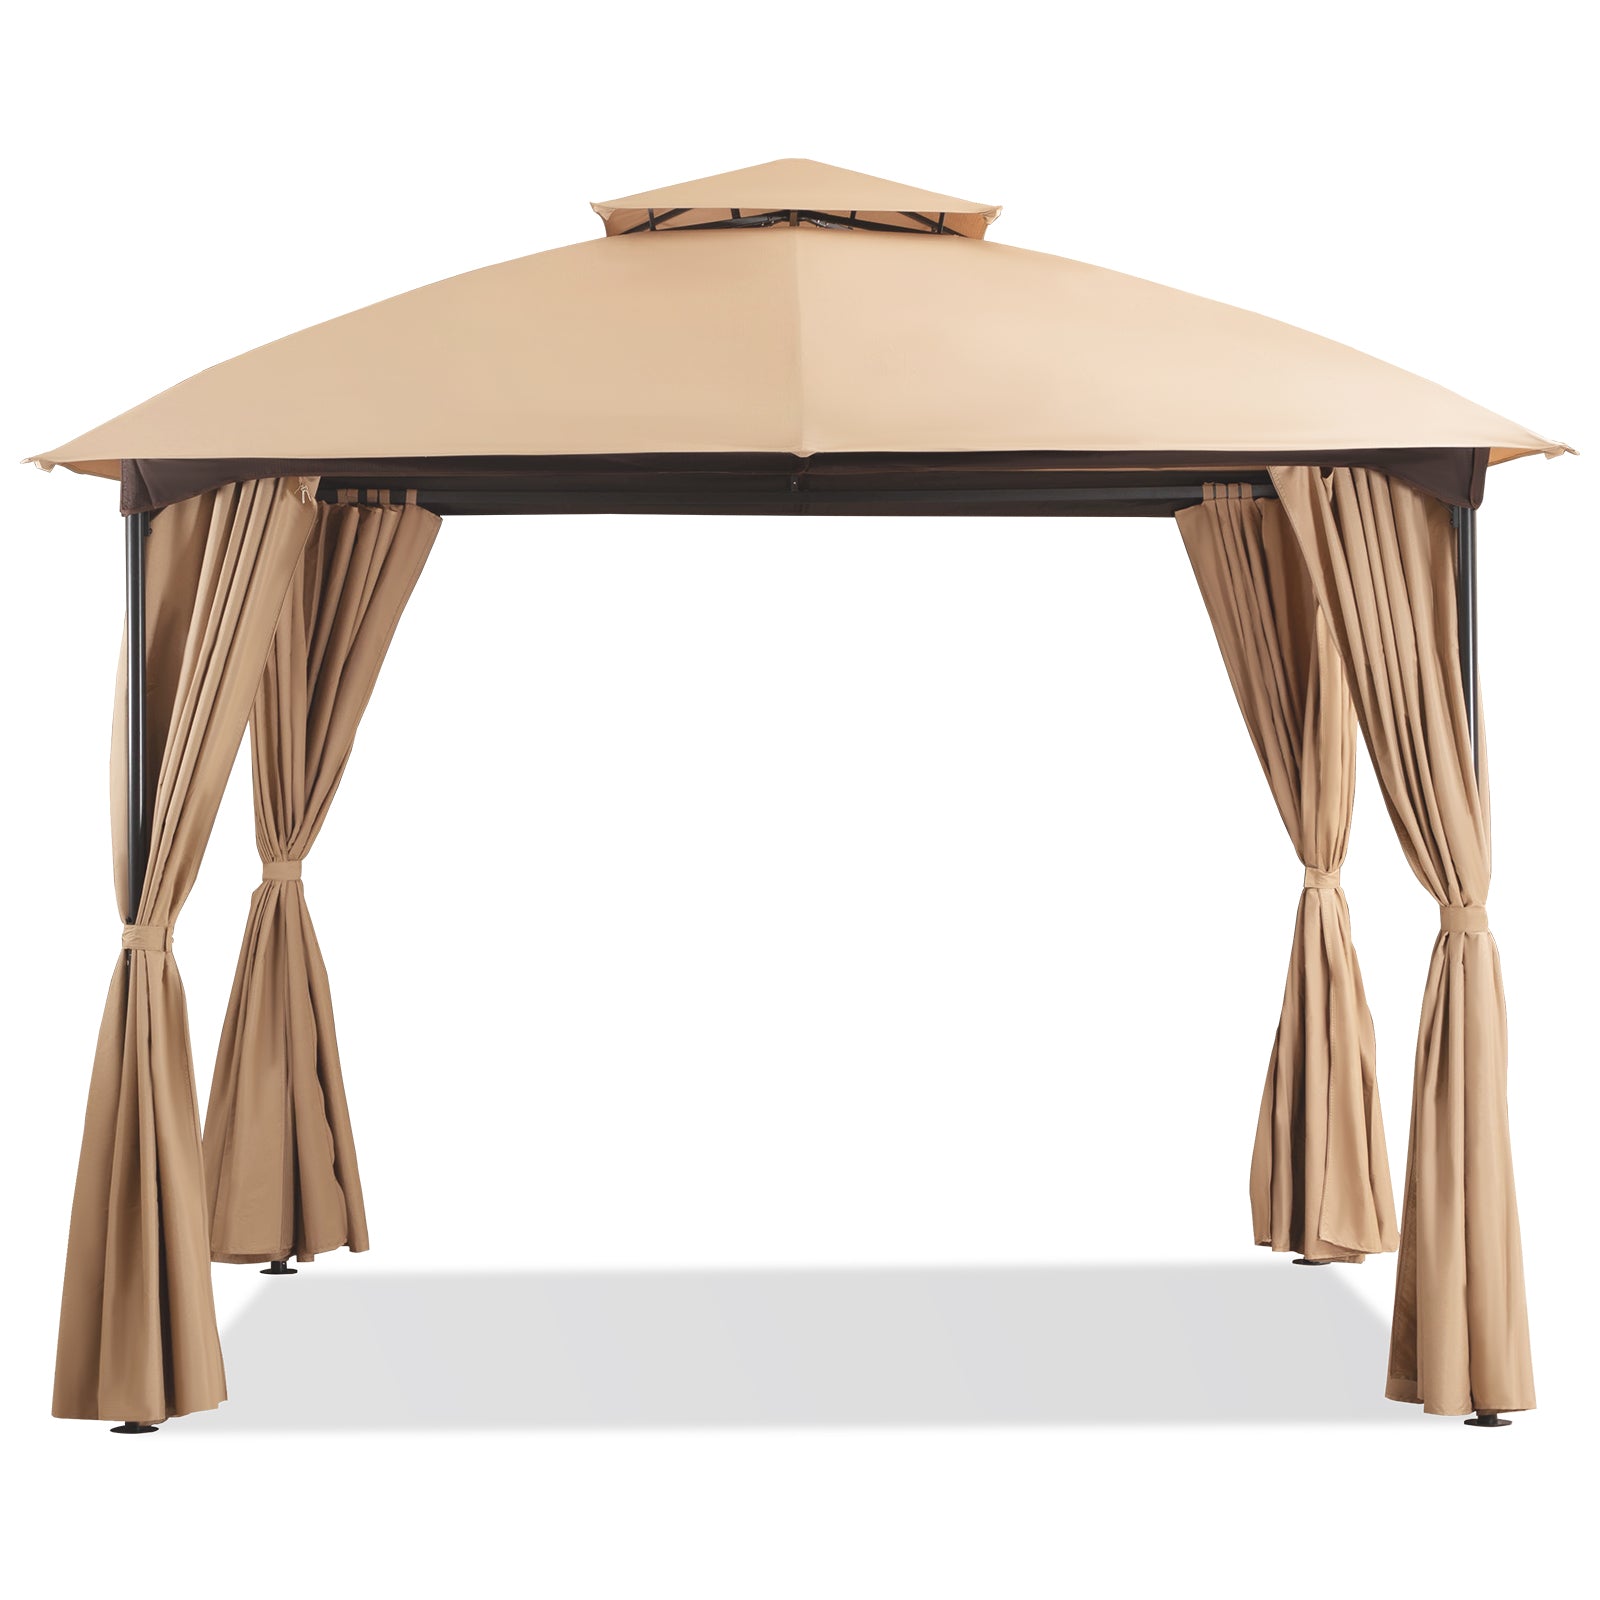 LAUSAINT HOME Accessories for gazebo